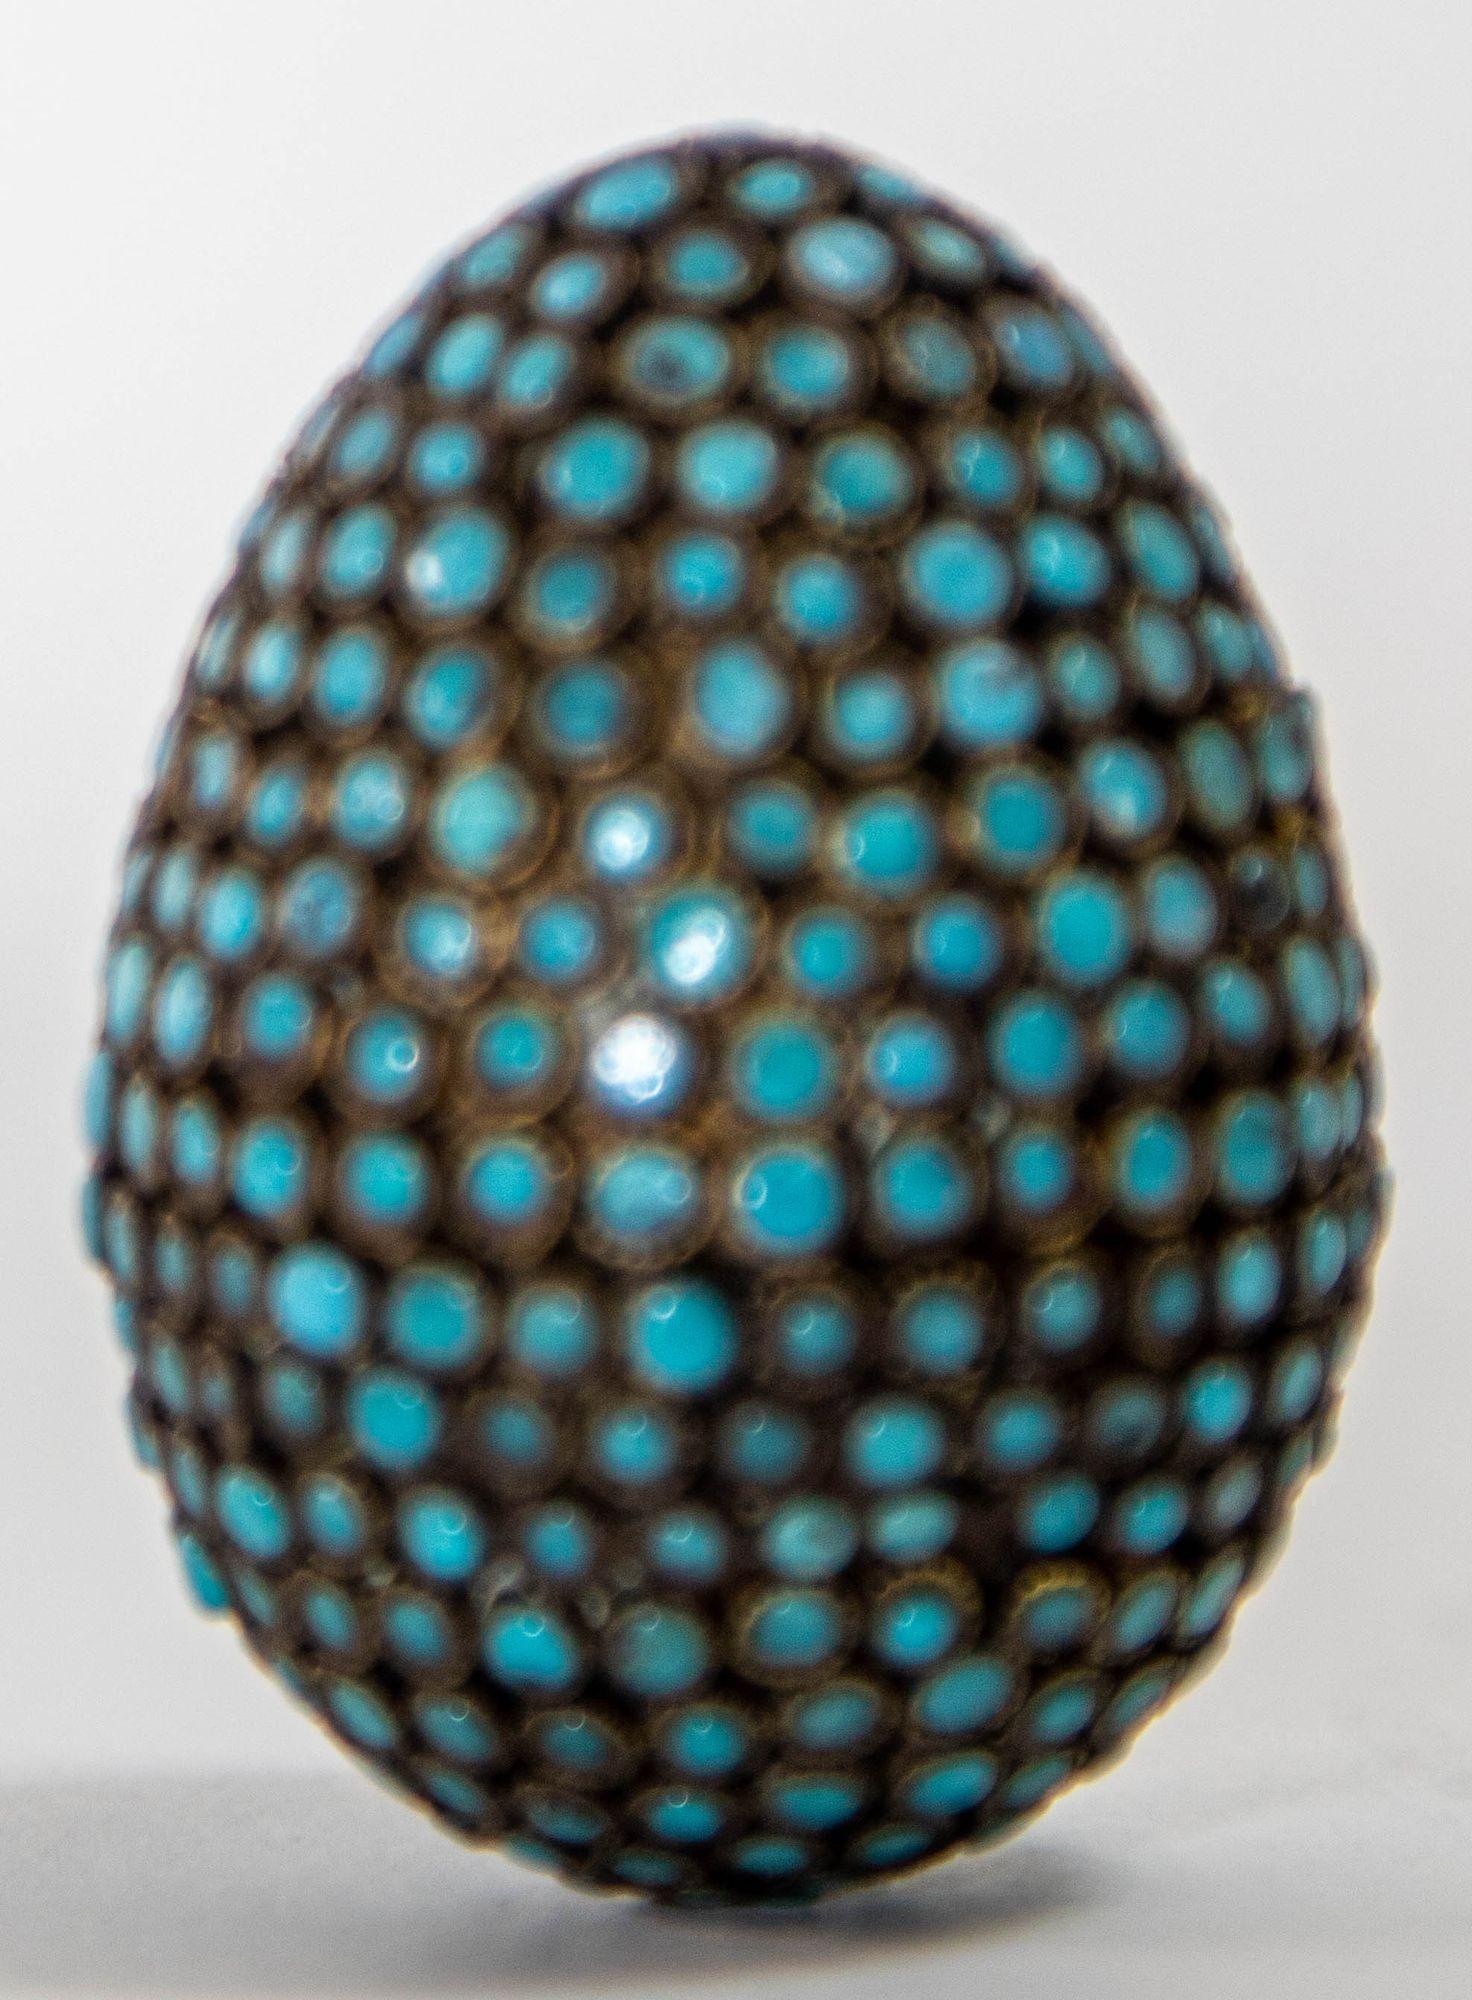 Folk Art Antique Tibetan Egg Shaped Box with Turquoise Blue Stone Inlay For Sale